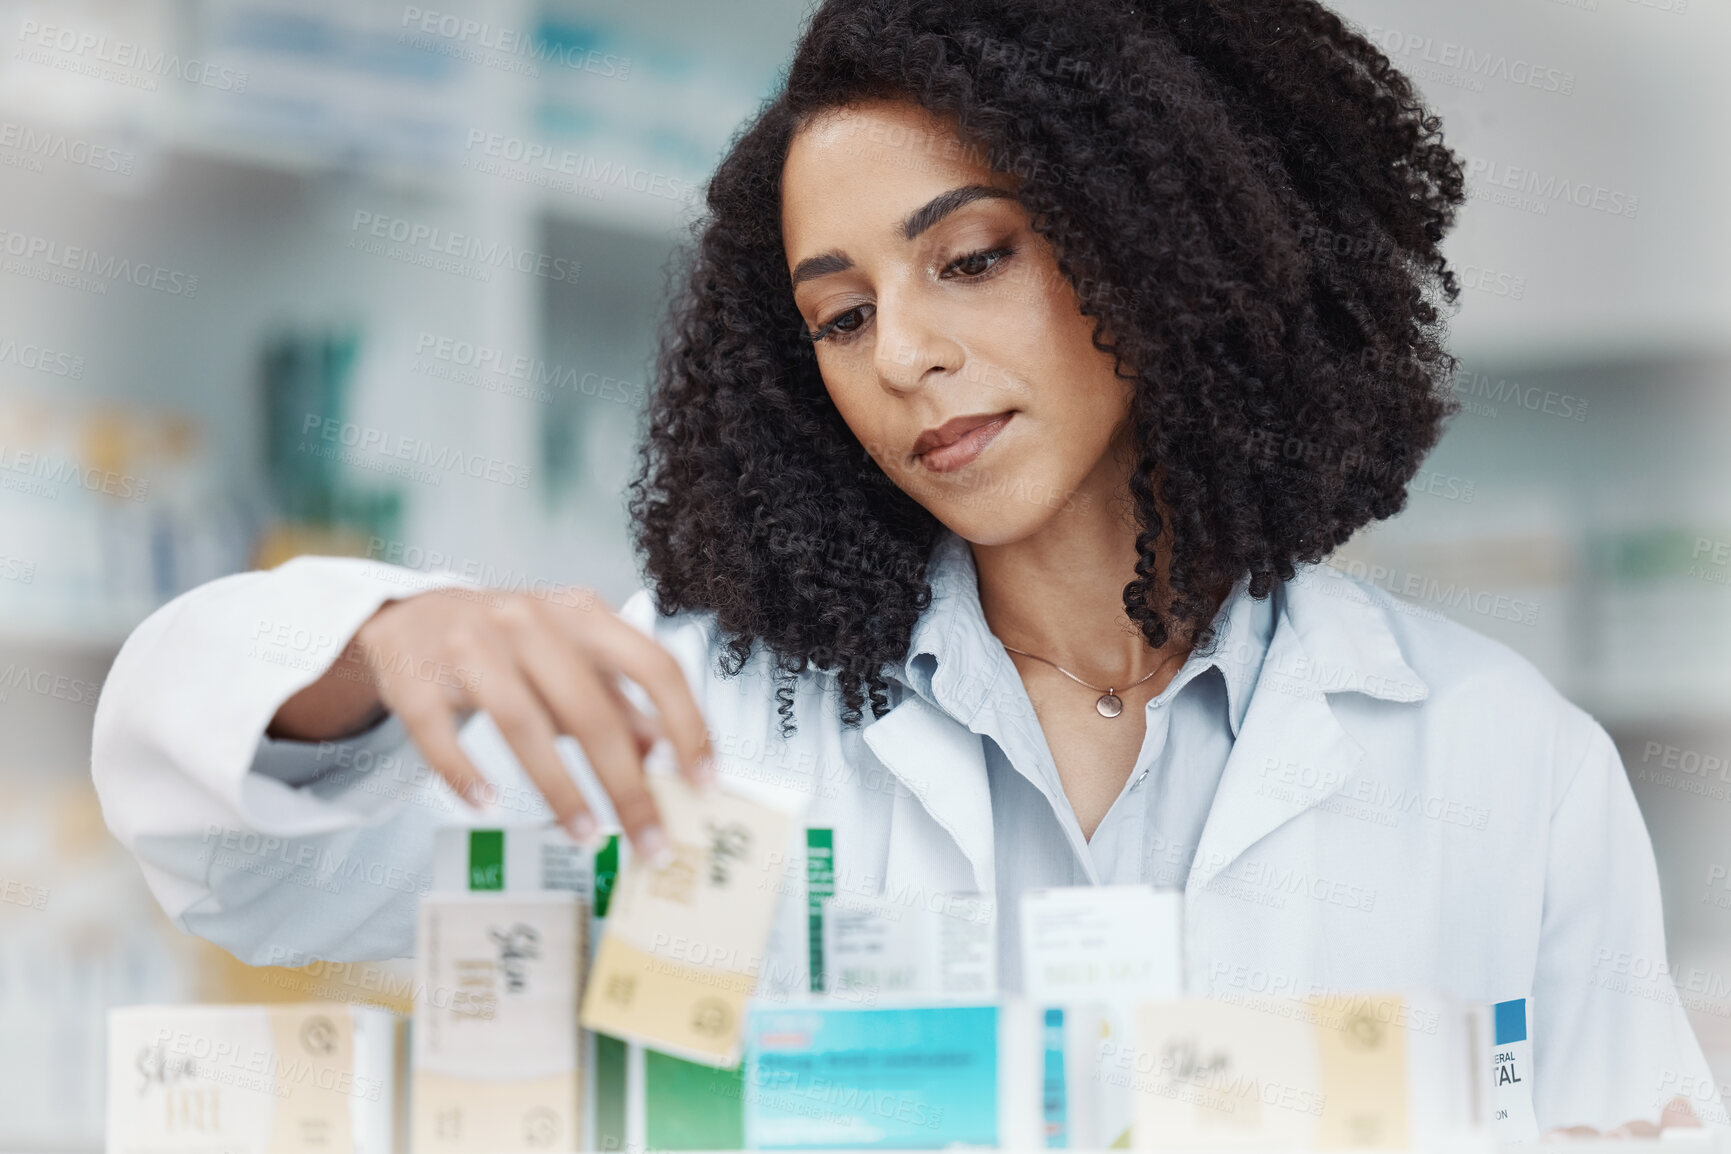 Buy stock photo Pharmacy, medicine and pills with woman reading side effects in store for healthcare, drugs dispensary and treatment prescription. Medical, shelf and pharmacist check label information on product